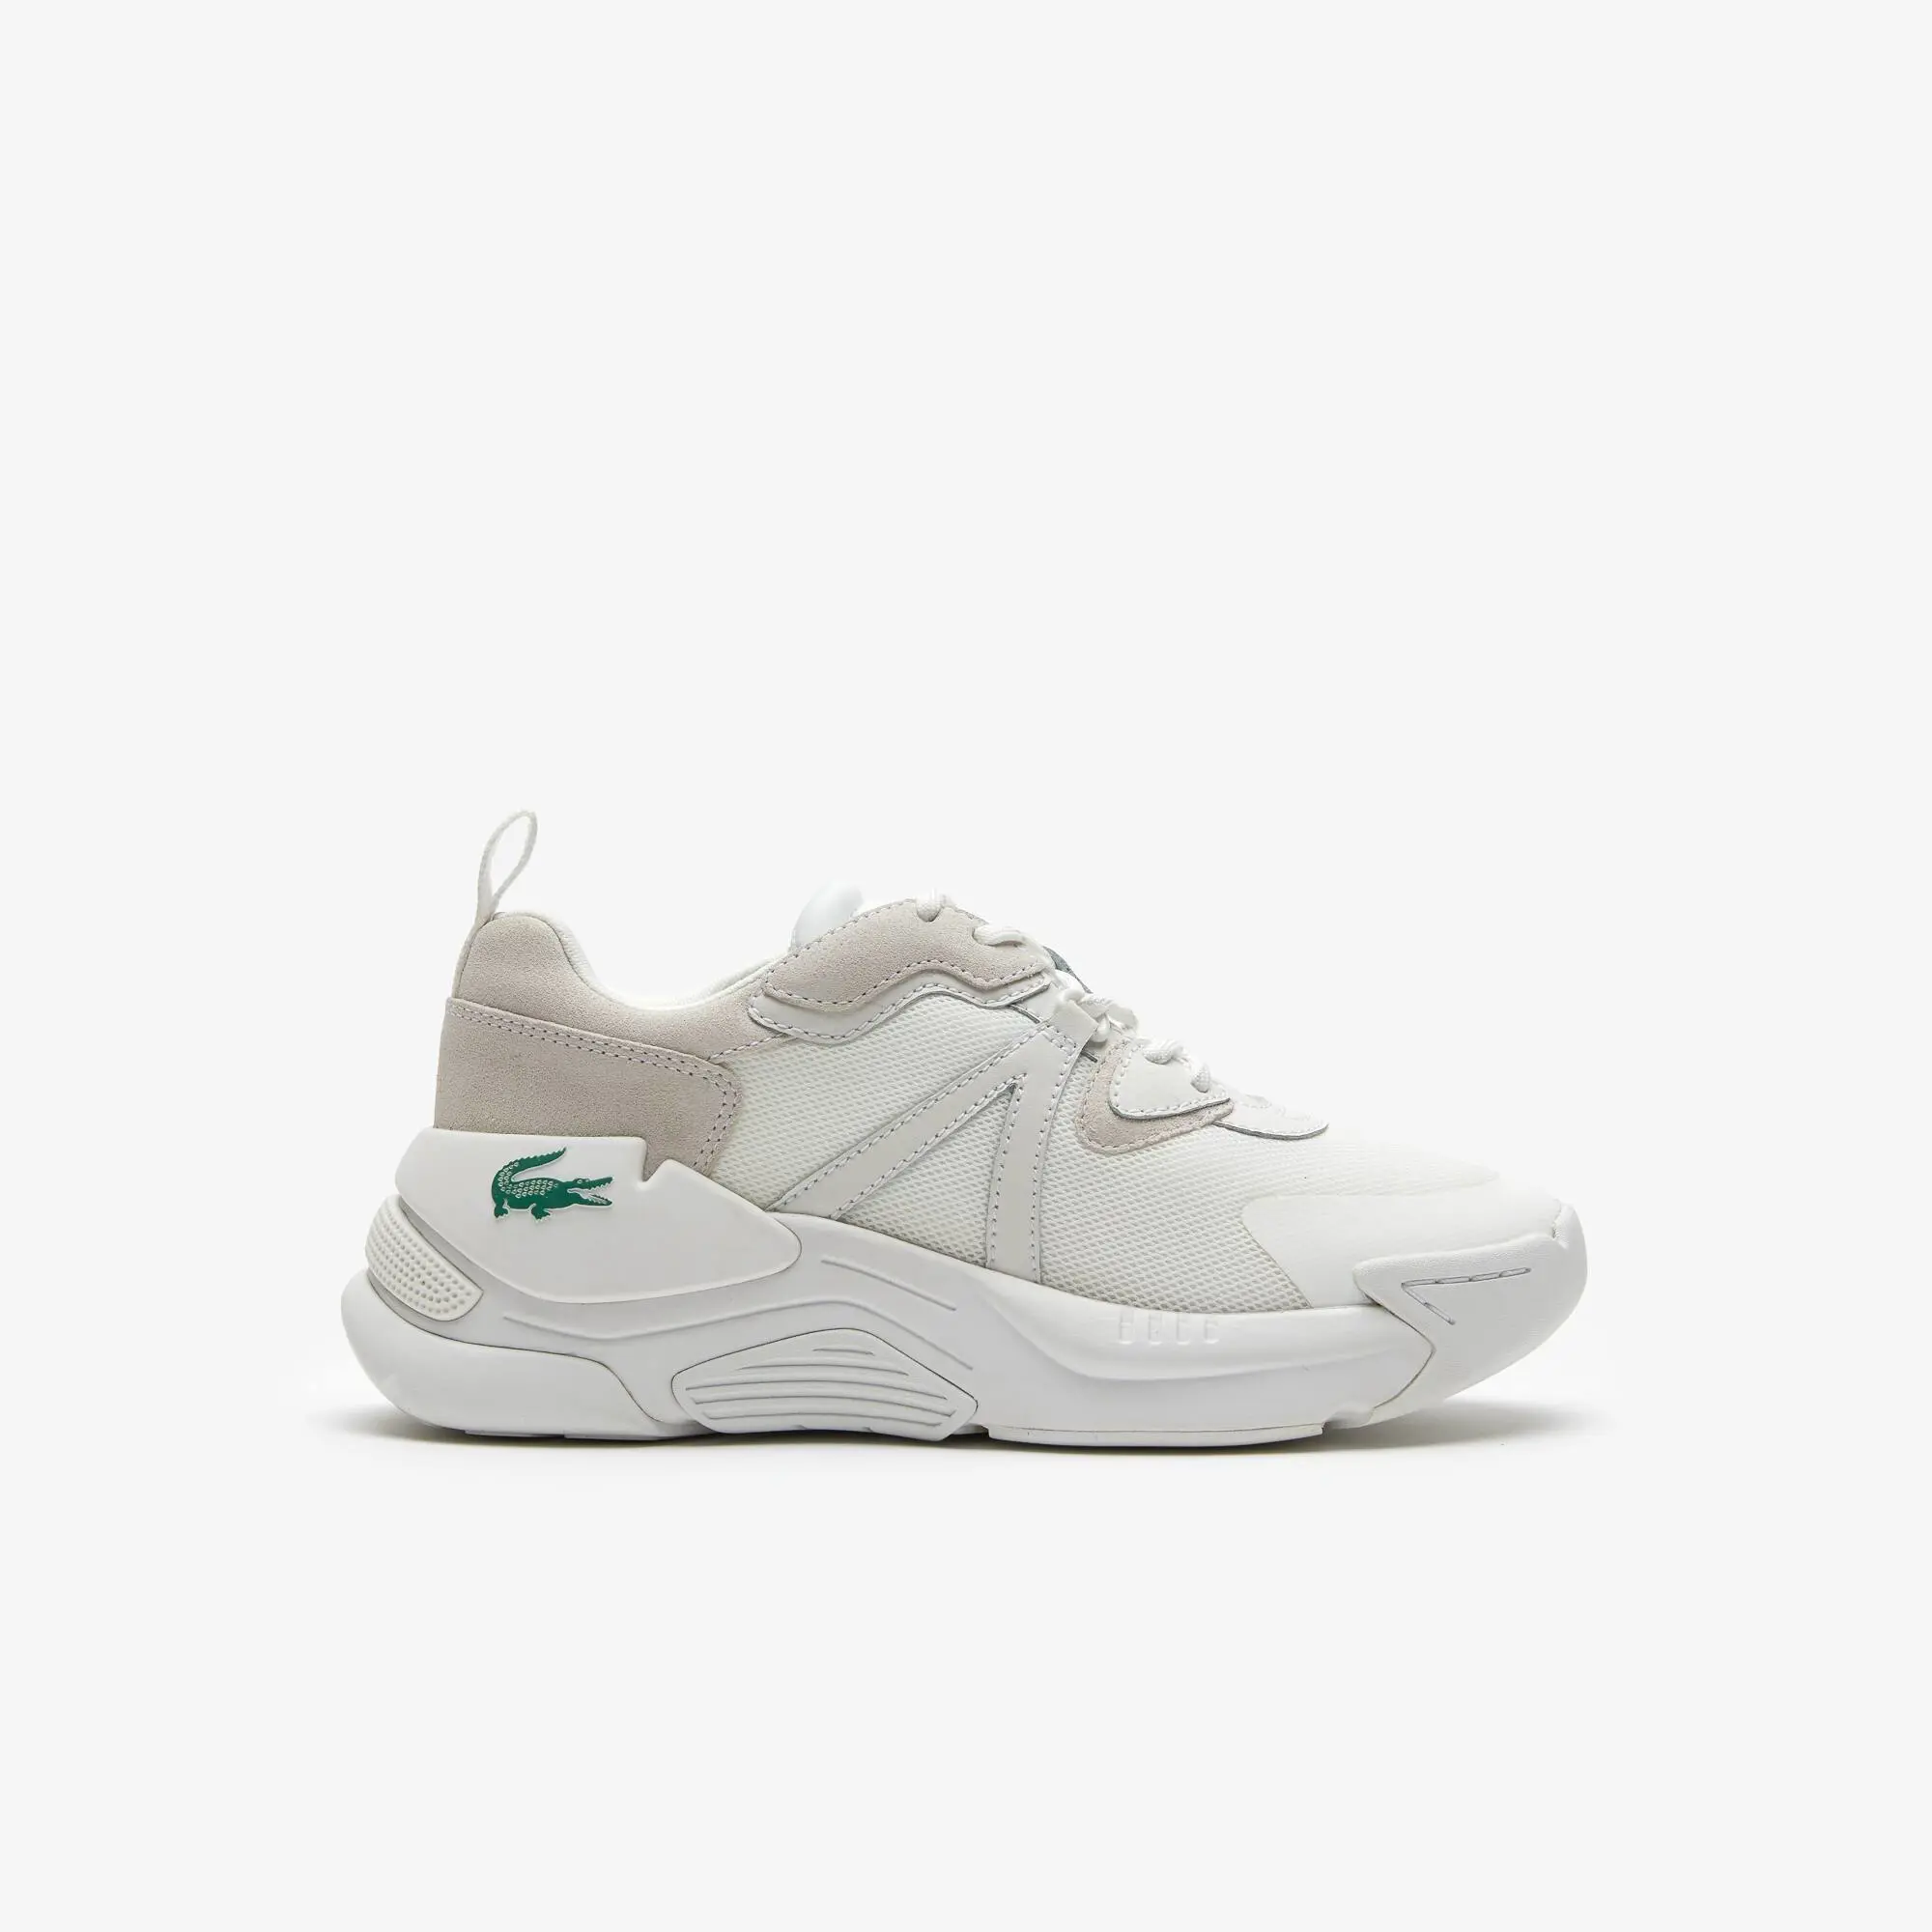 Lacoste Women's Lacoste LW2 Xtra Leather Tonal Trainers. 1